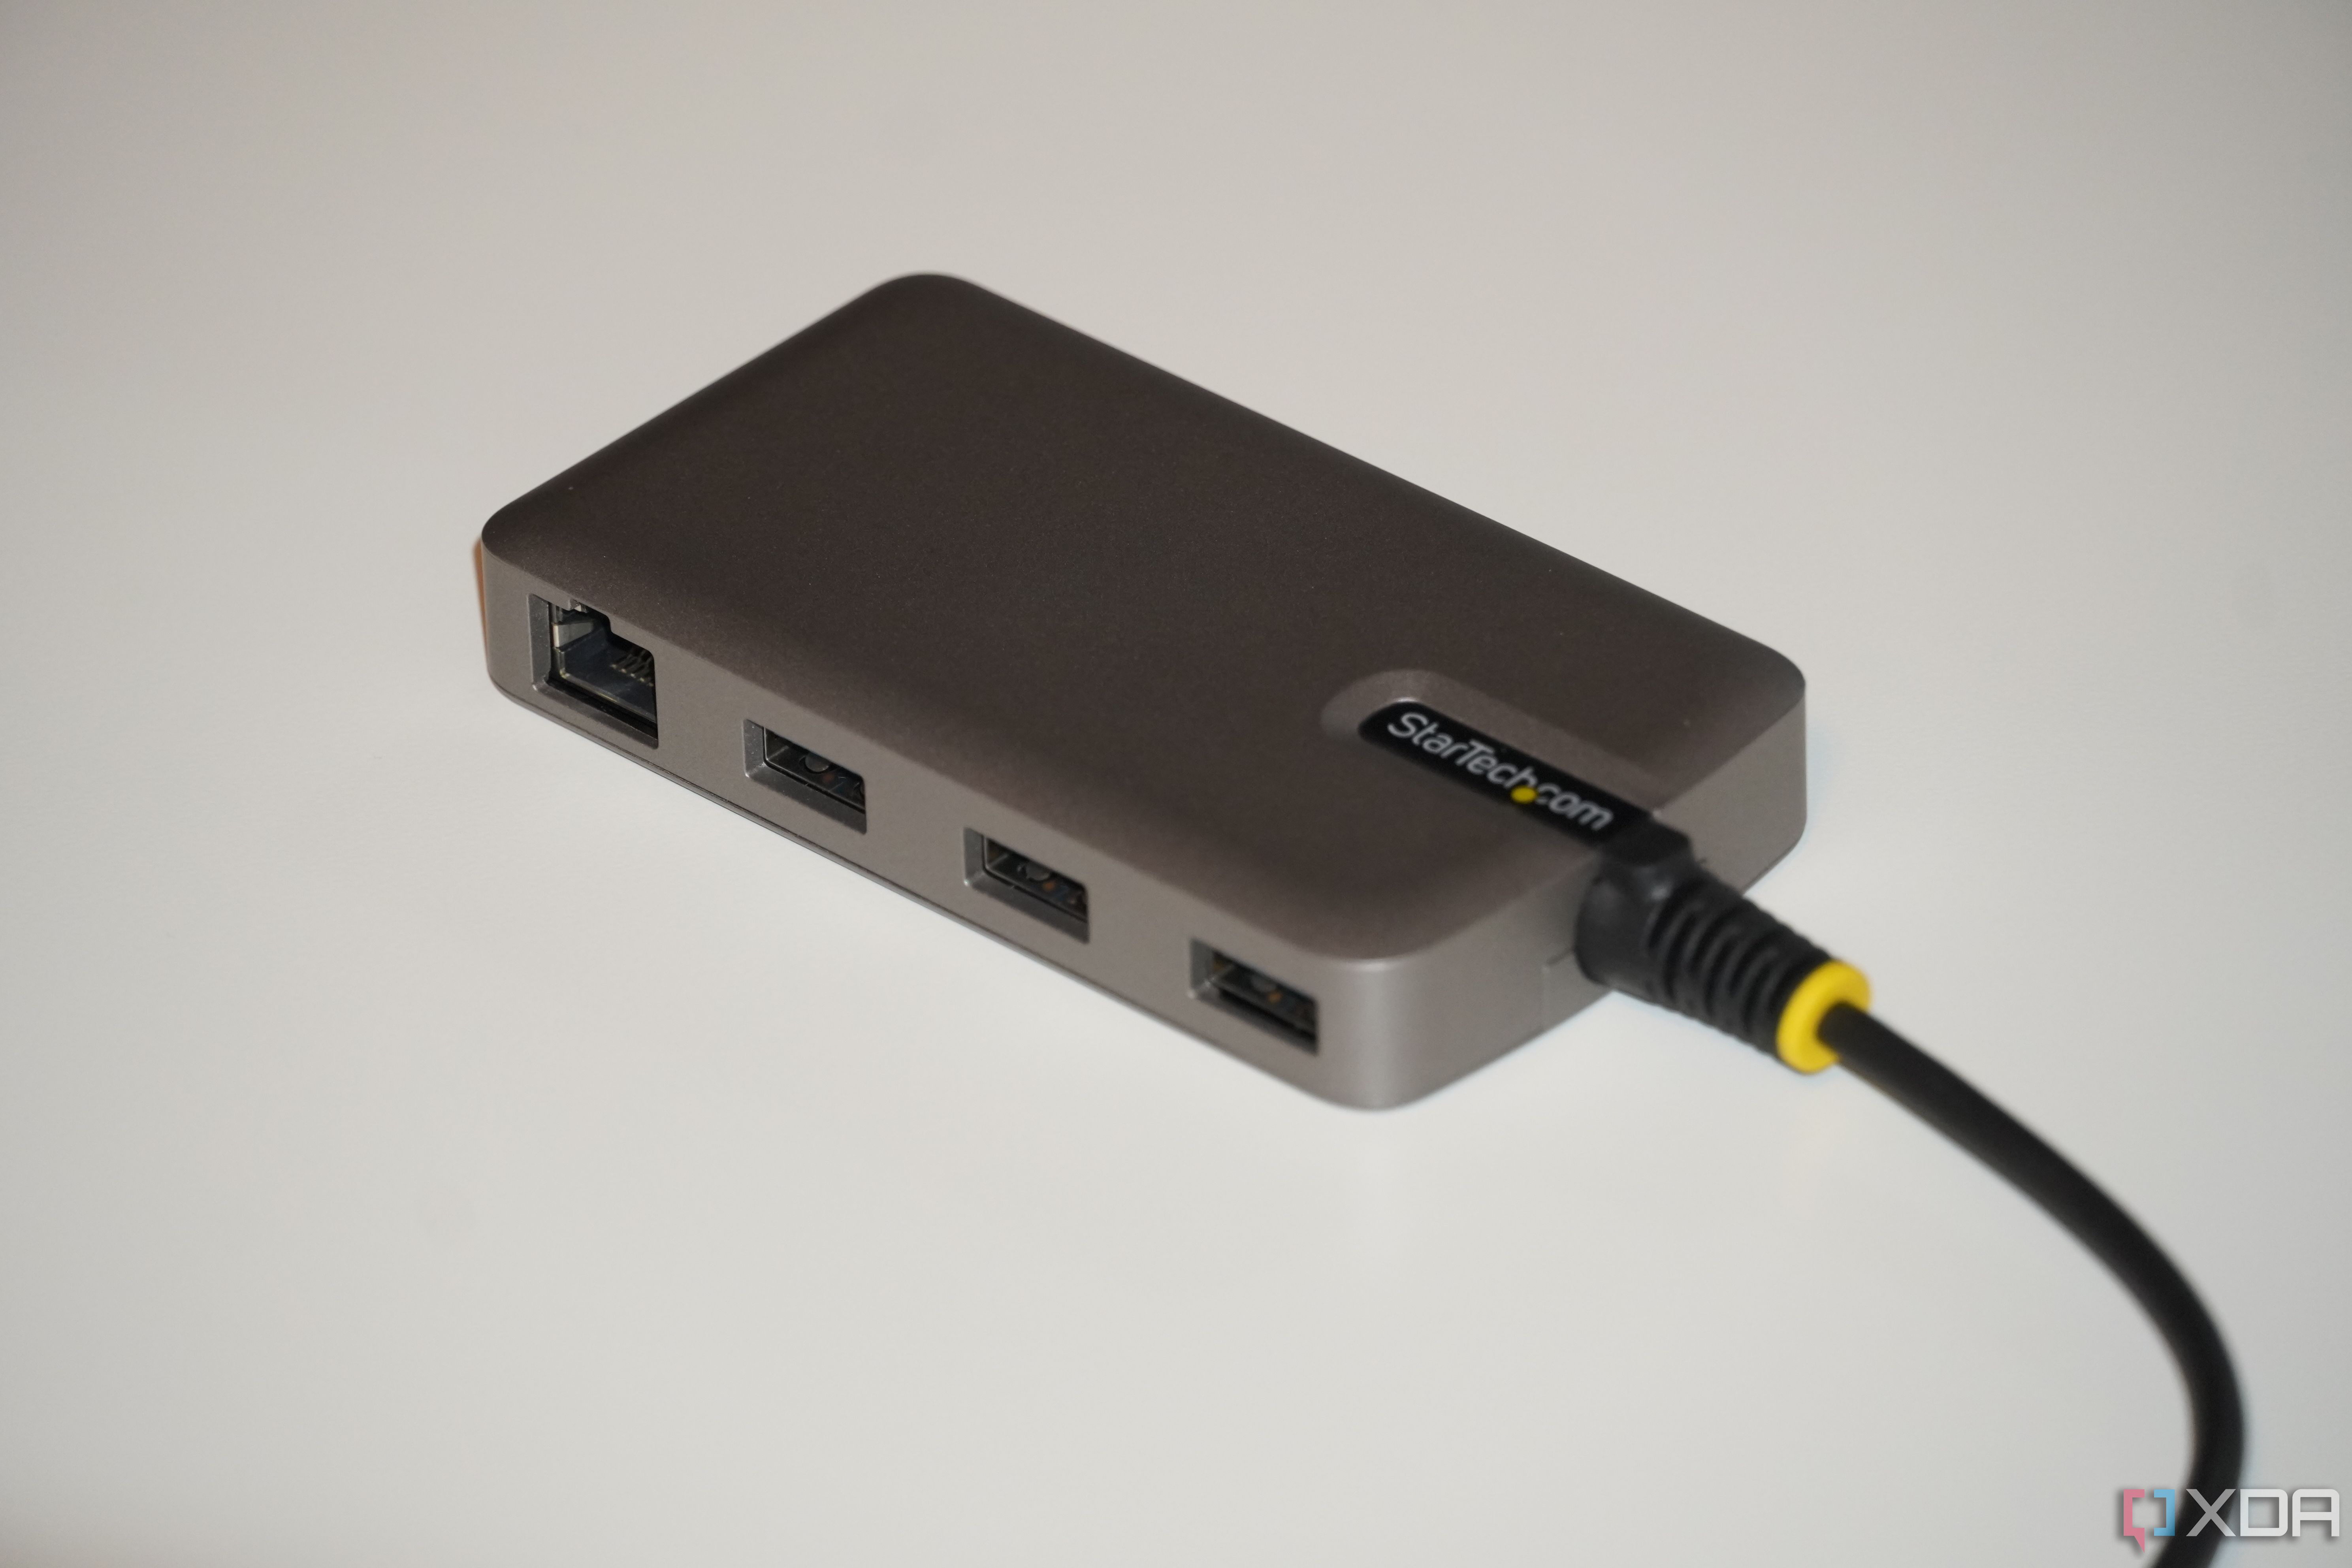 The ports on the USB-C hub with Ethernet from Startech.